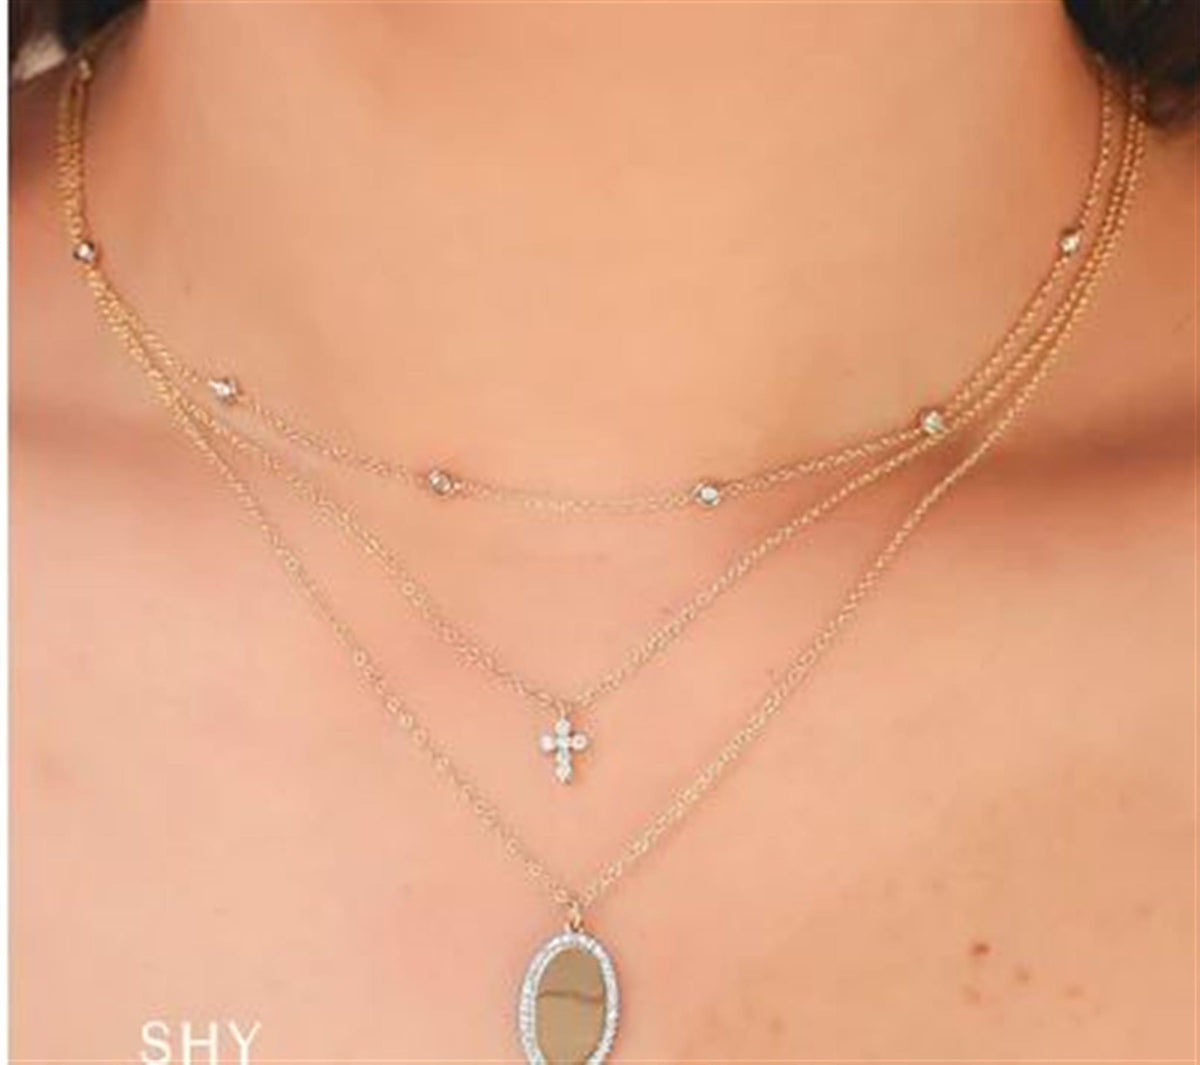 Shy Creation 14Kt Yellow Gold Oval Disc Necklace with .11cttw Natural Diamond Halo